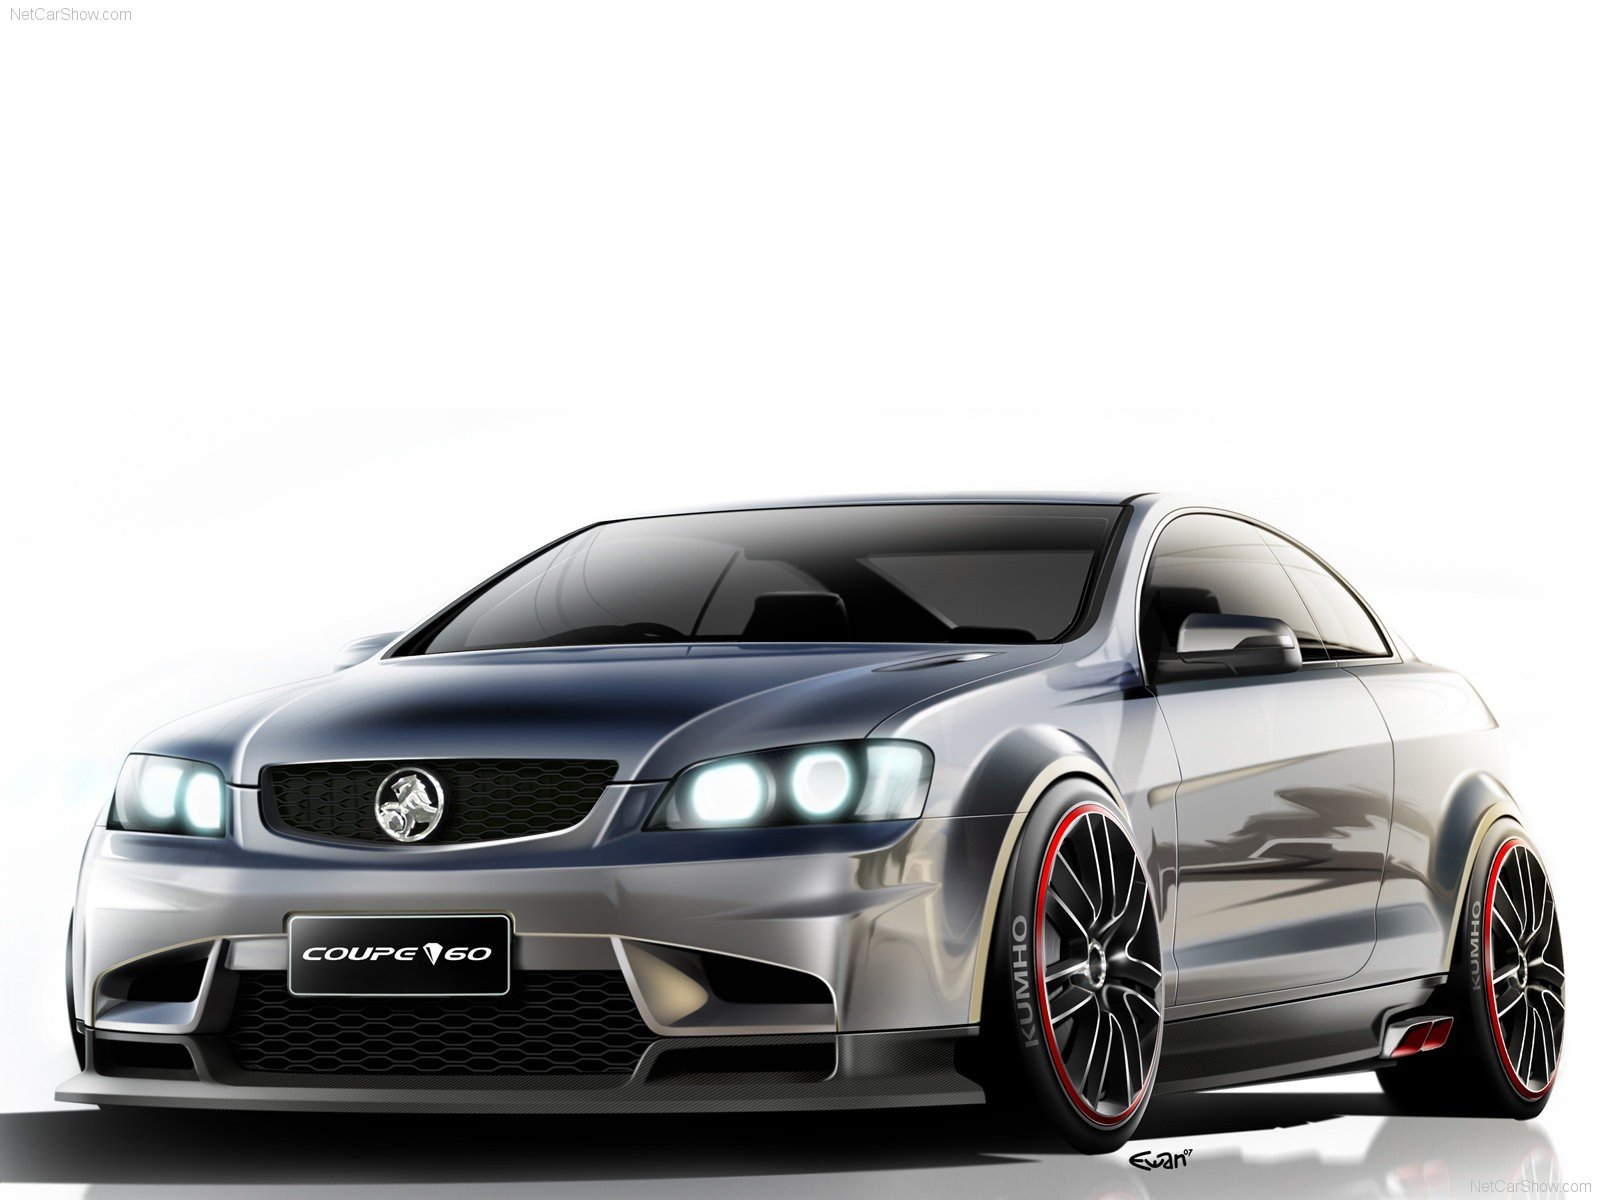 cars, Concept, Art, Drawings, Holden, Sports, Cars, Holden, Coupe, 60, Aussie, Muscle, Car Wallpaper